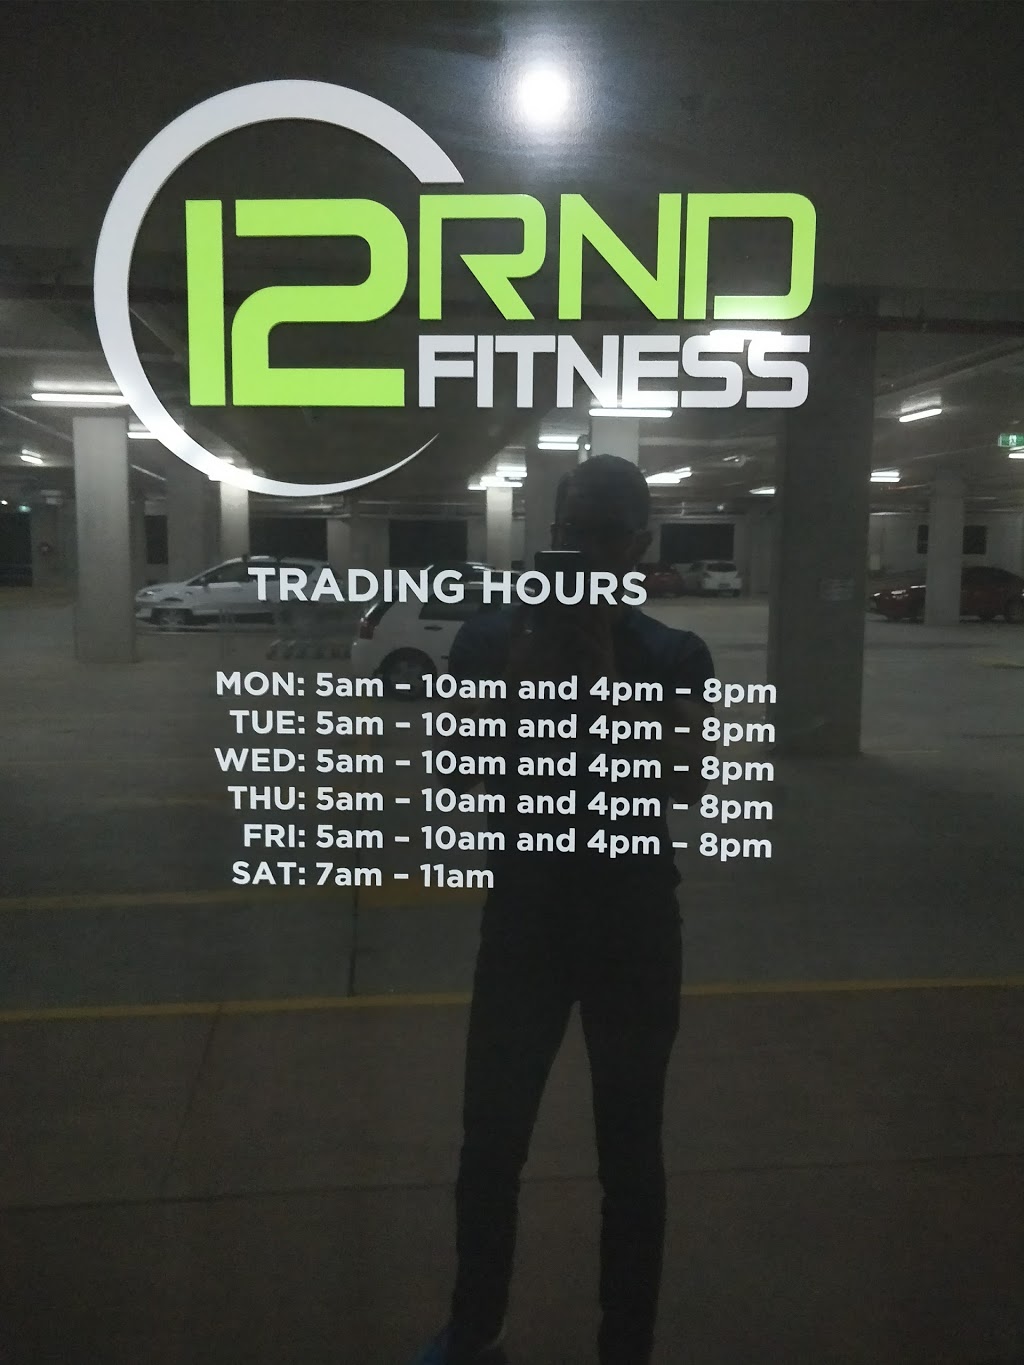 12RND Fitness Eatons Hill | Shop 21/640 S Pine Rd, Brendale QLD 4037, Australia | Phone: 0452 127 639